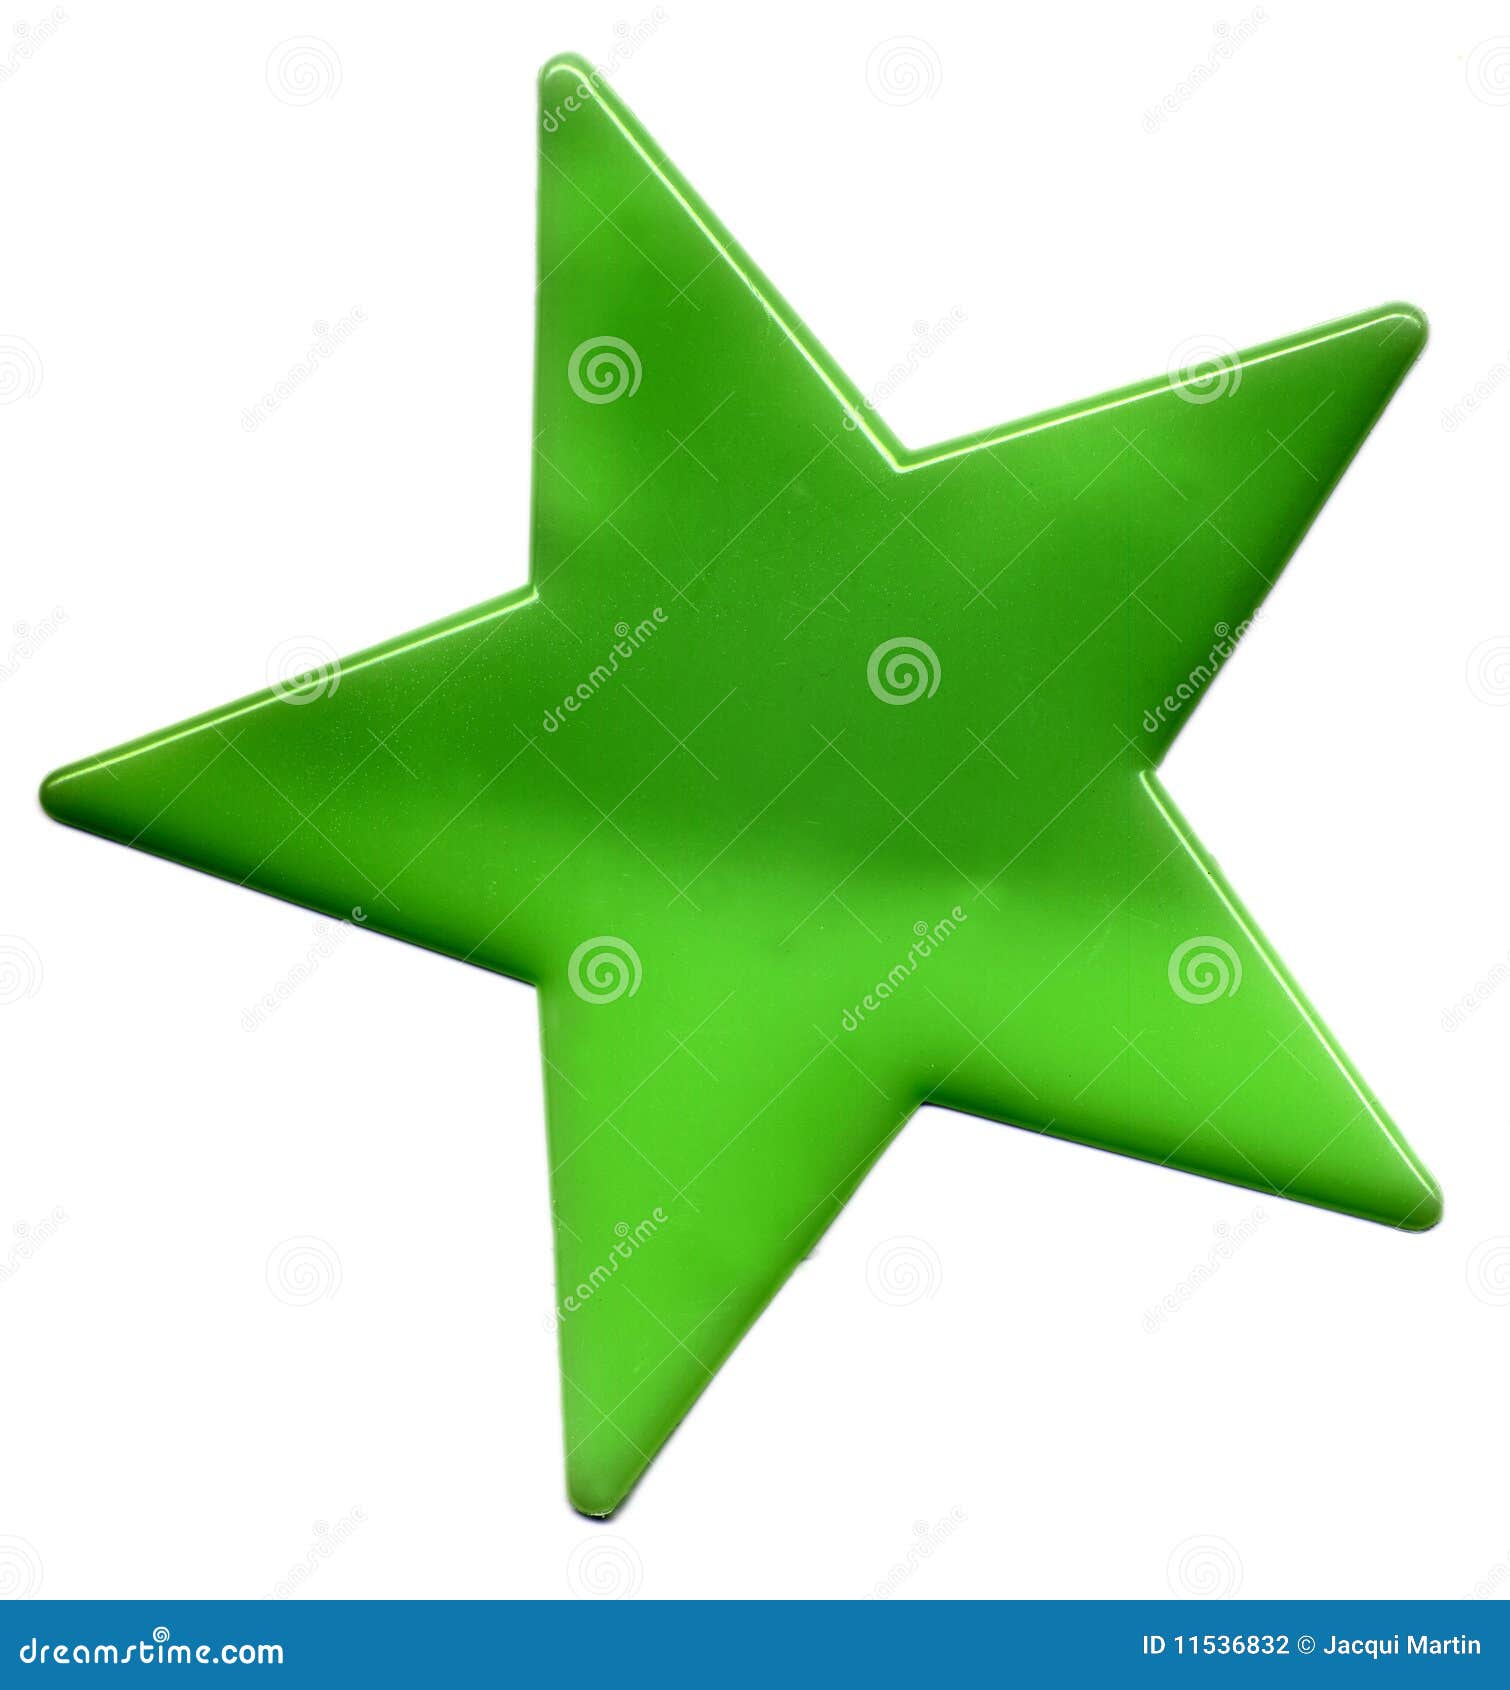 Green star stock photo. Image of isolated, pointed, five - 11536832